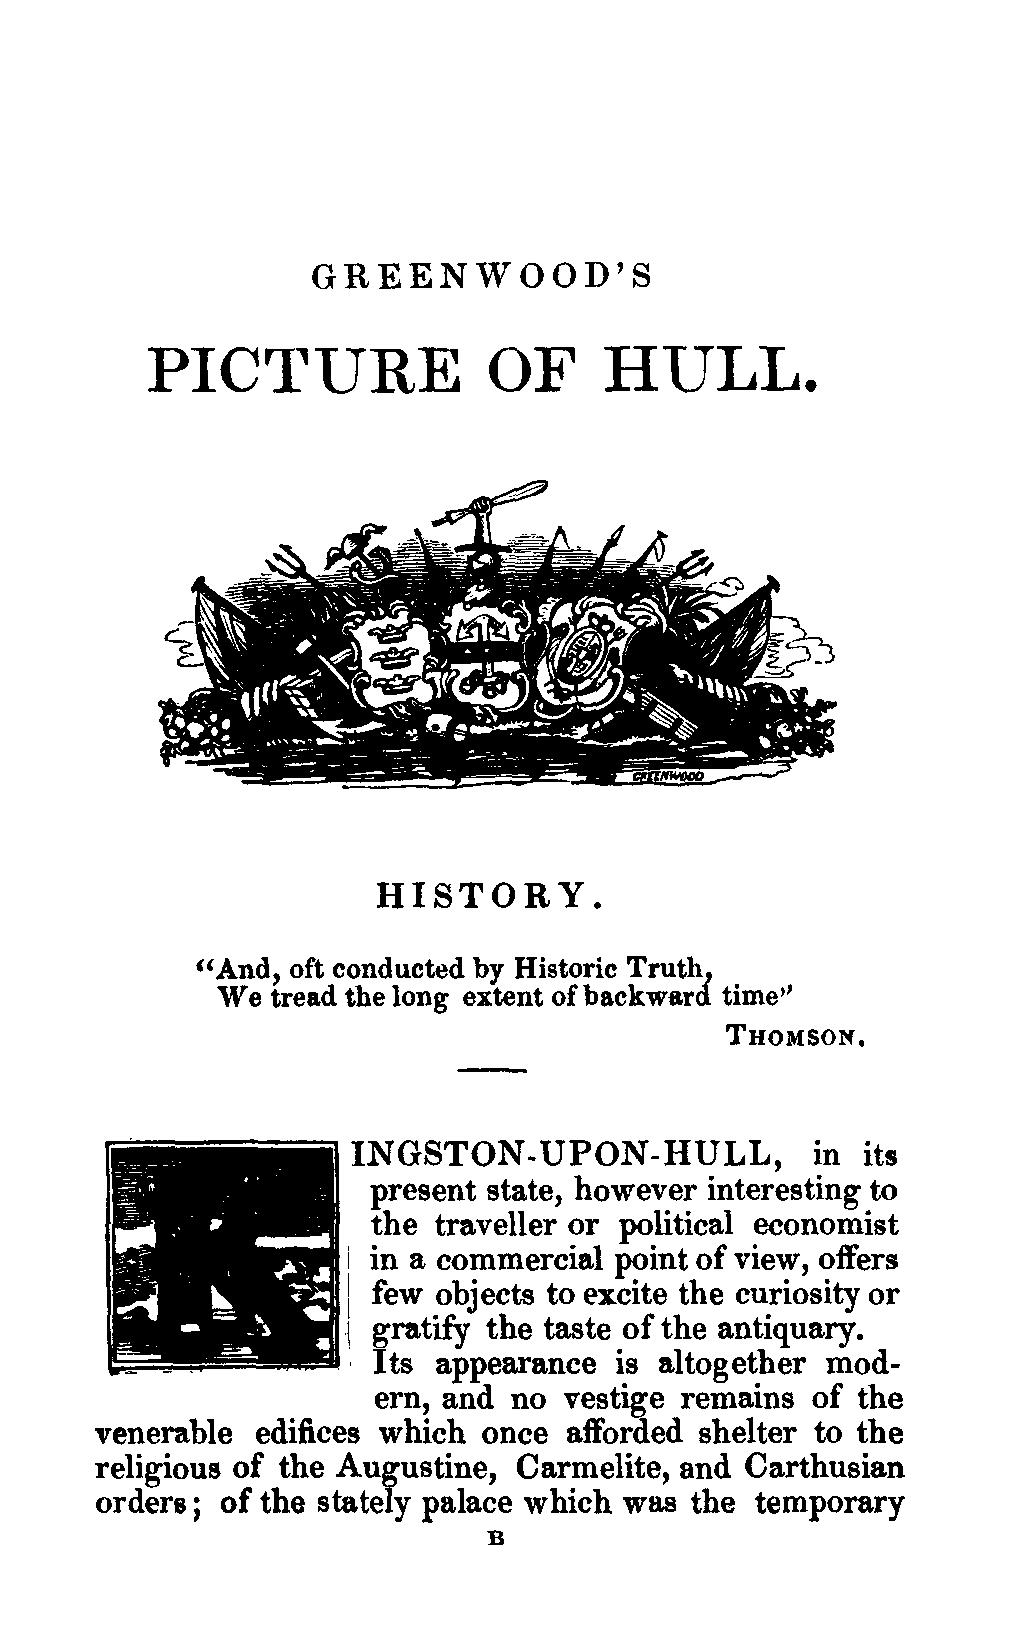 GREENWOOD'S PICTURE OF HULL. HISTORY.